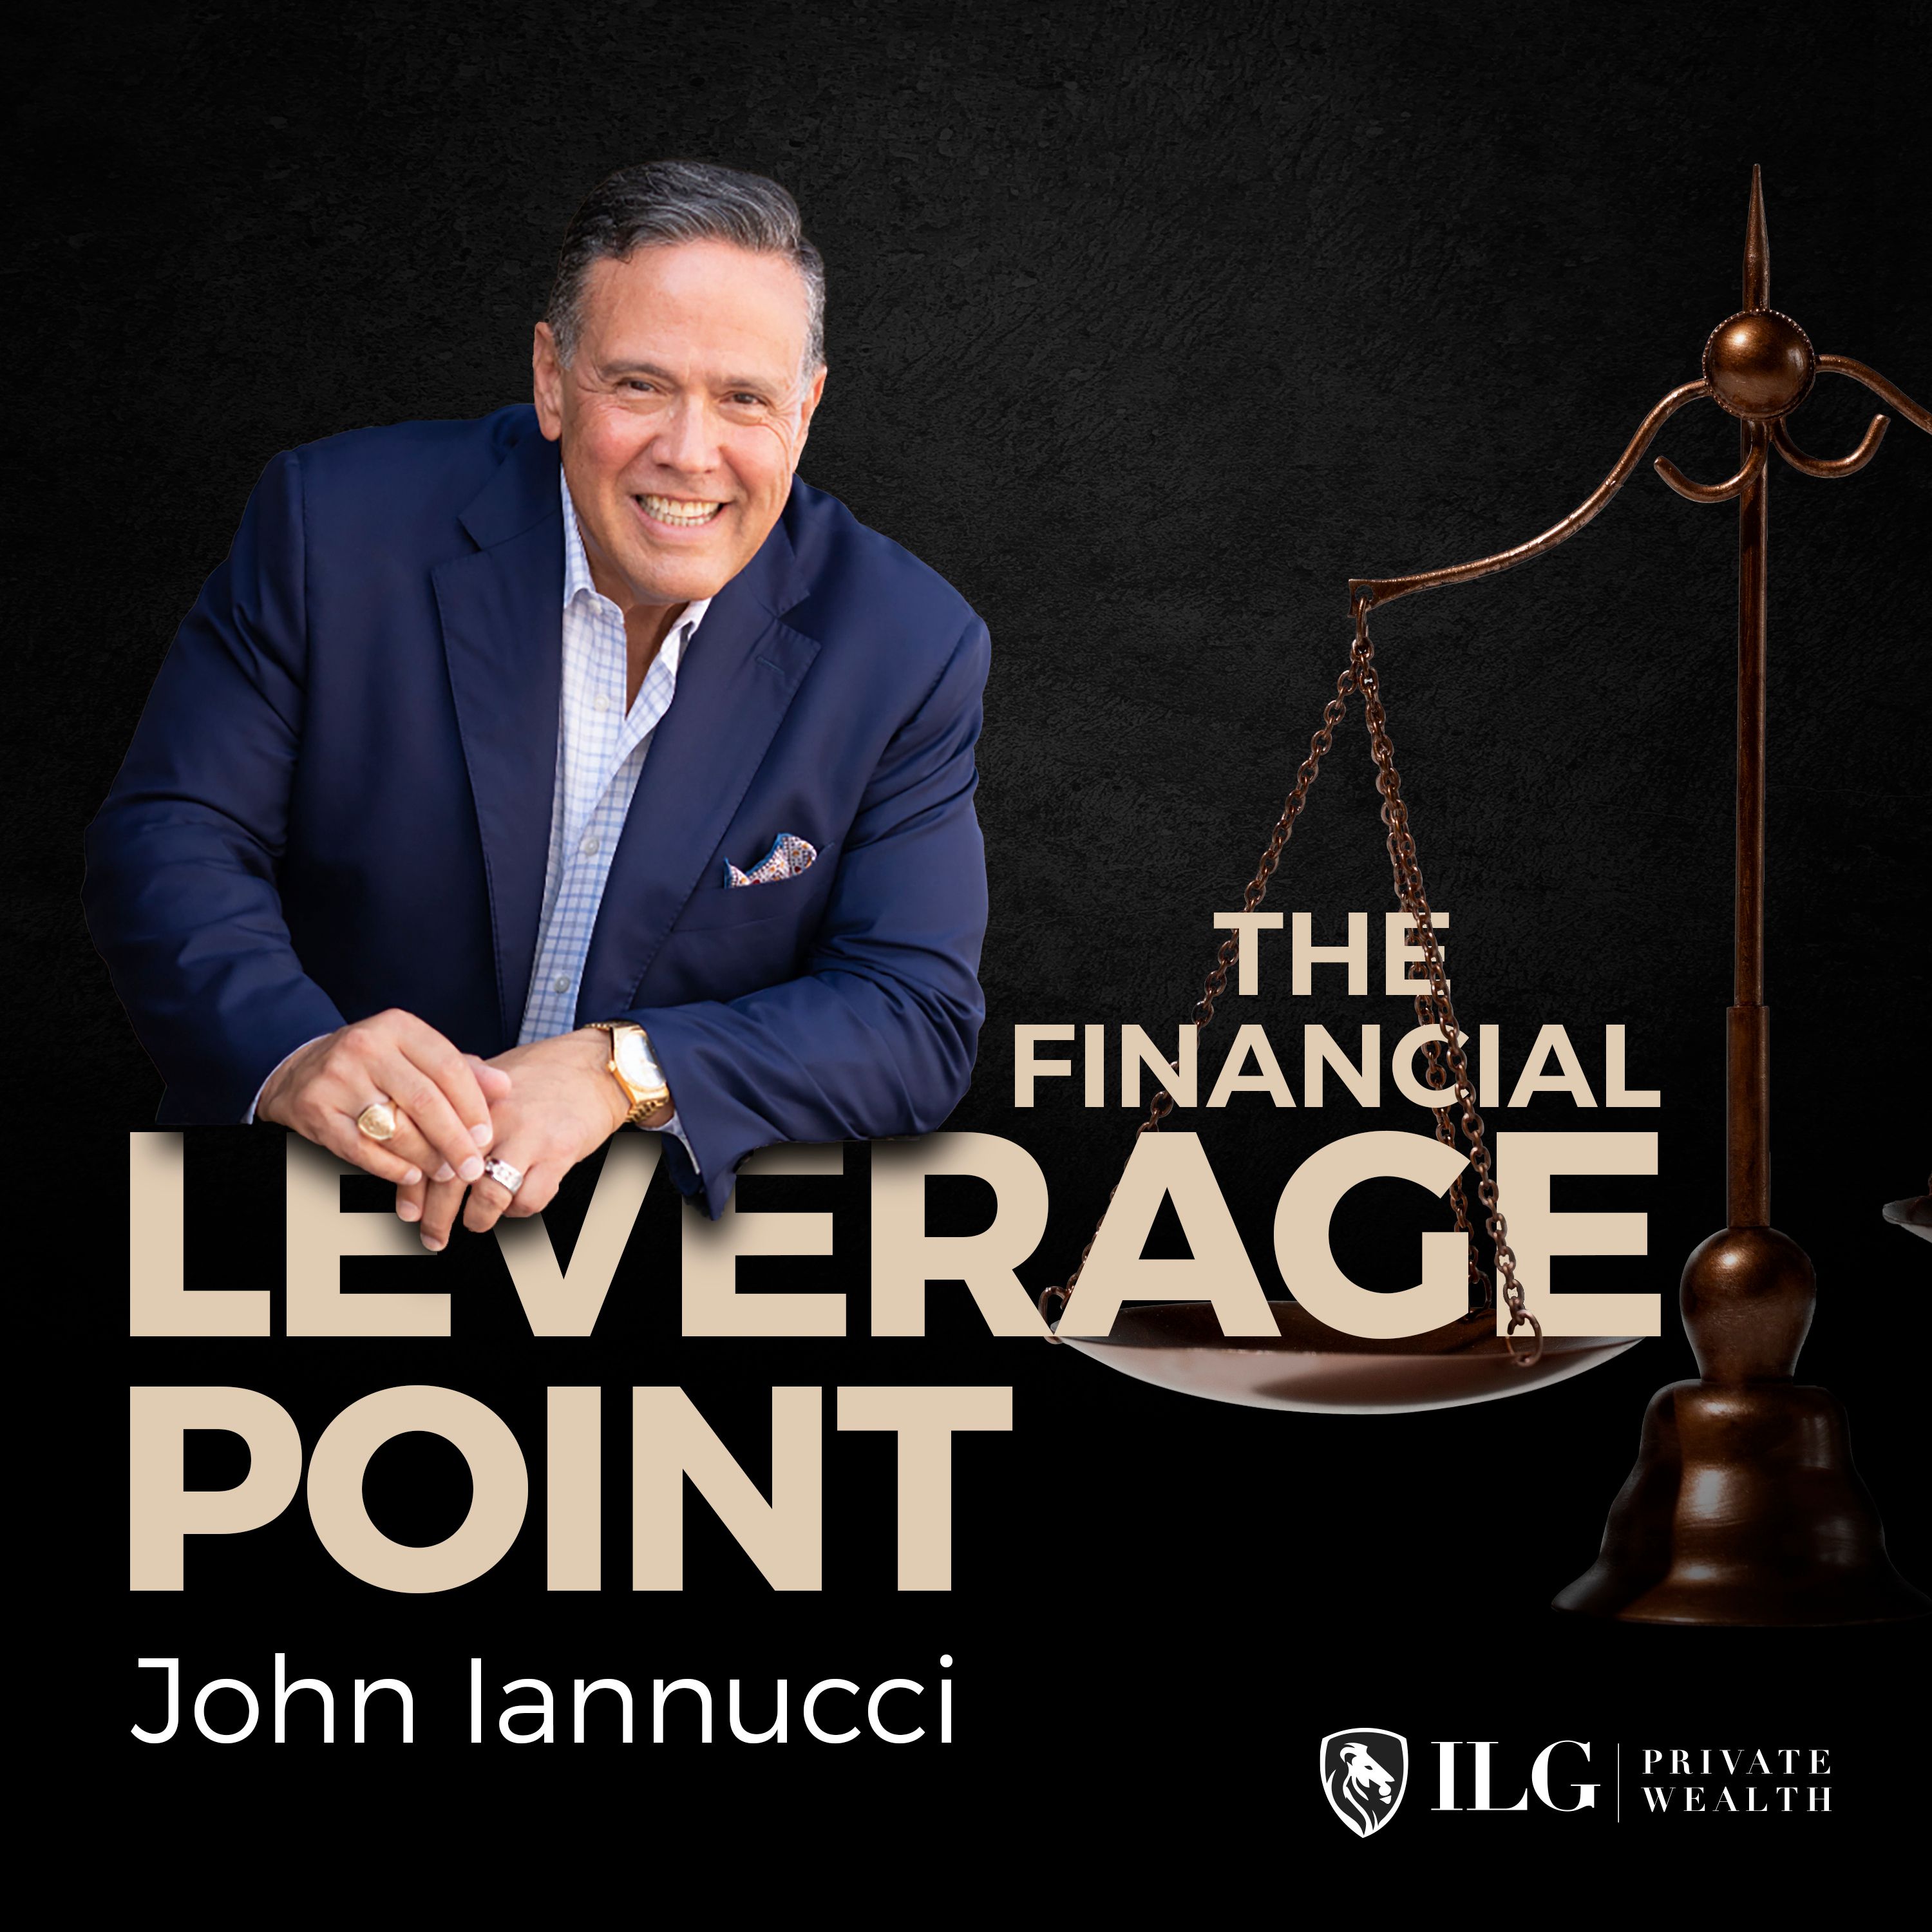 The Financial Leverage Point